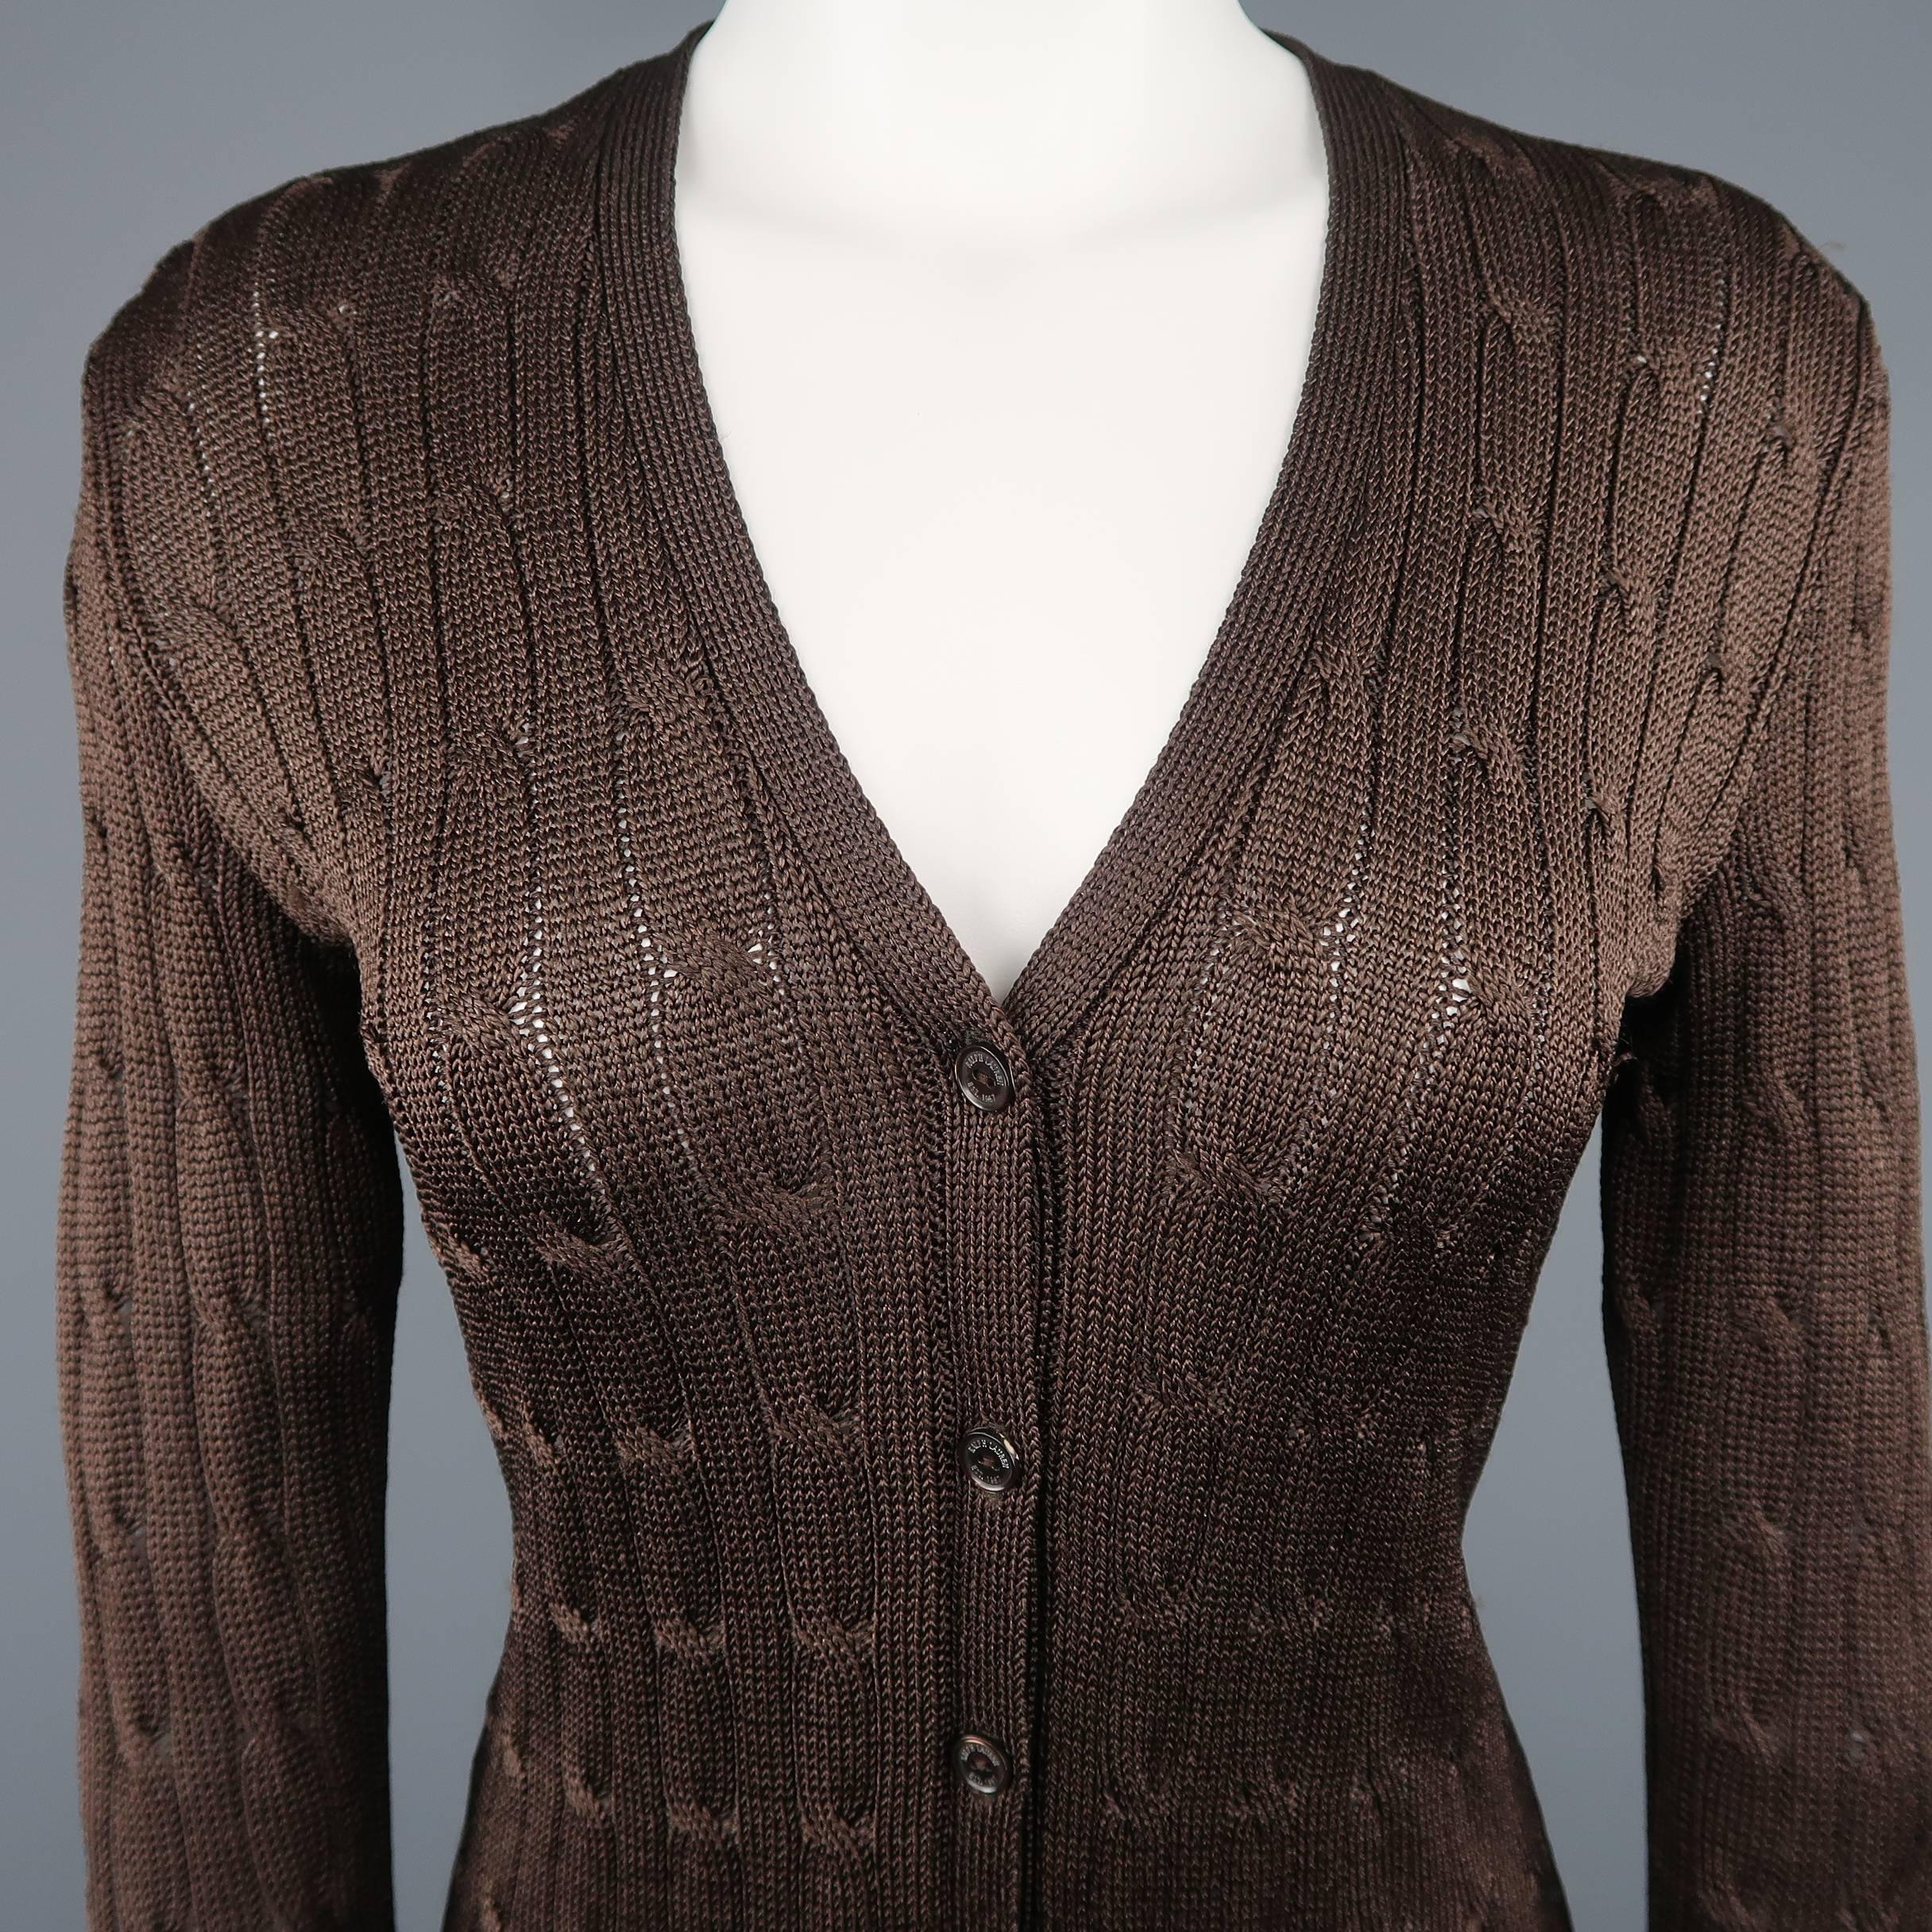 RALPH LAUREN BLACK LABEL cardigan comes in chocolate brown silk cable knit with a V neck, pockets, and extra long length.
 
Good Pre-Owned Condition.
Marked: S
 
Measurements:
 
Shoulder: 16 in.
Bust: 34 in.
Sleeve: 25 in.
Length: 31 in.
